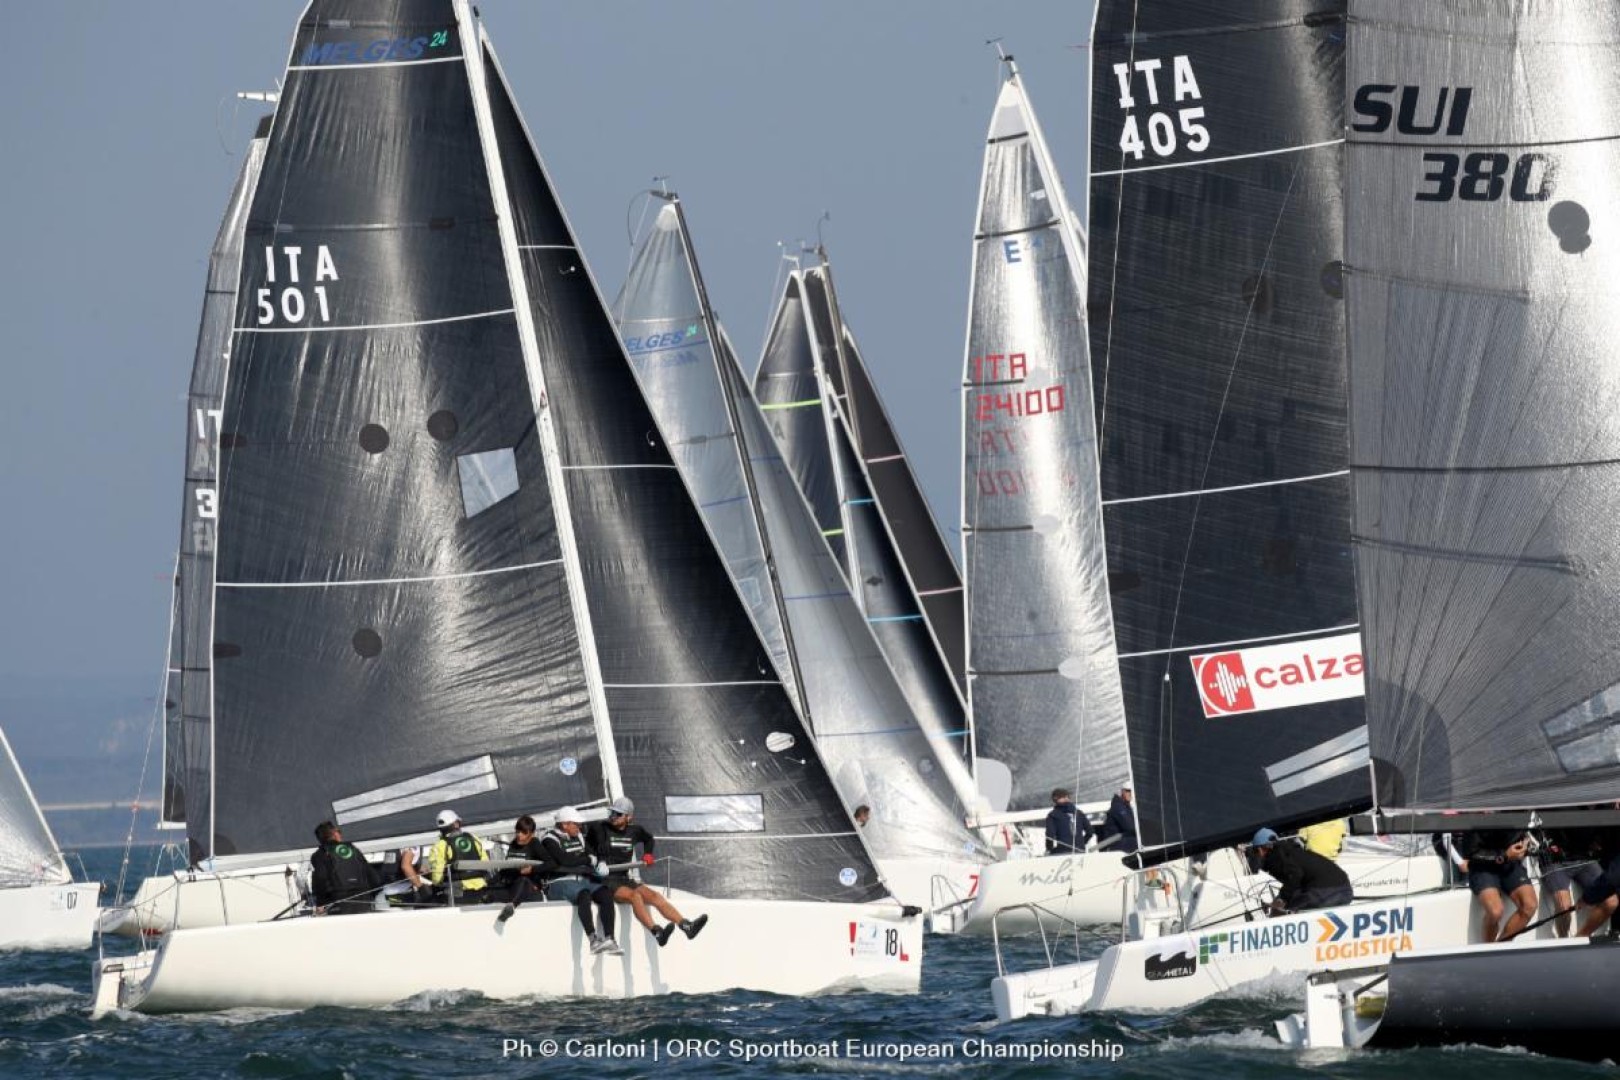 Today's crowded start lines of inshore racing at Sistiana - all photos Andrea Carloni